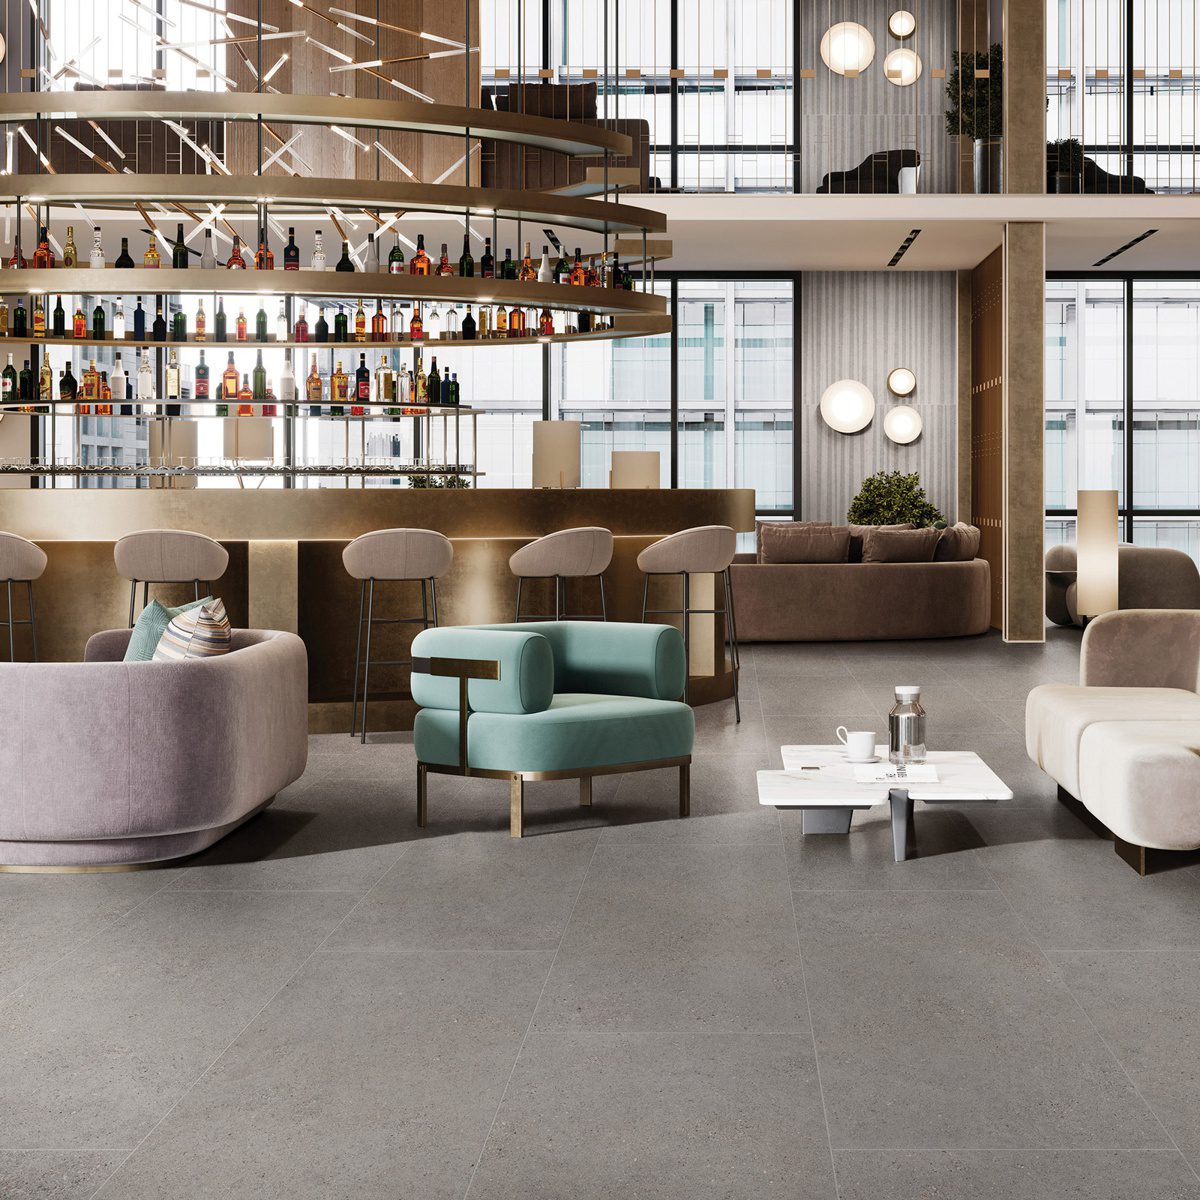 A bar or amenity space with Florida Tile Canal Street installed on the floor.